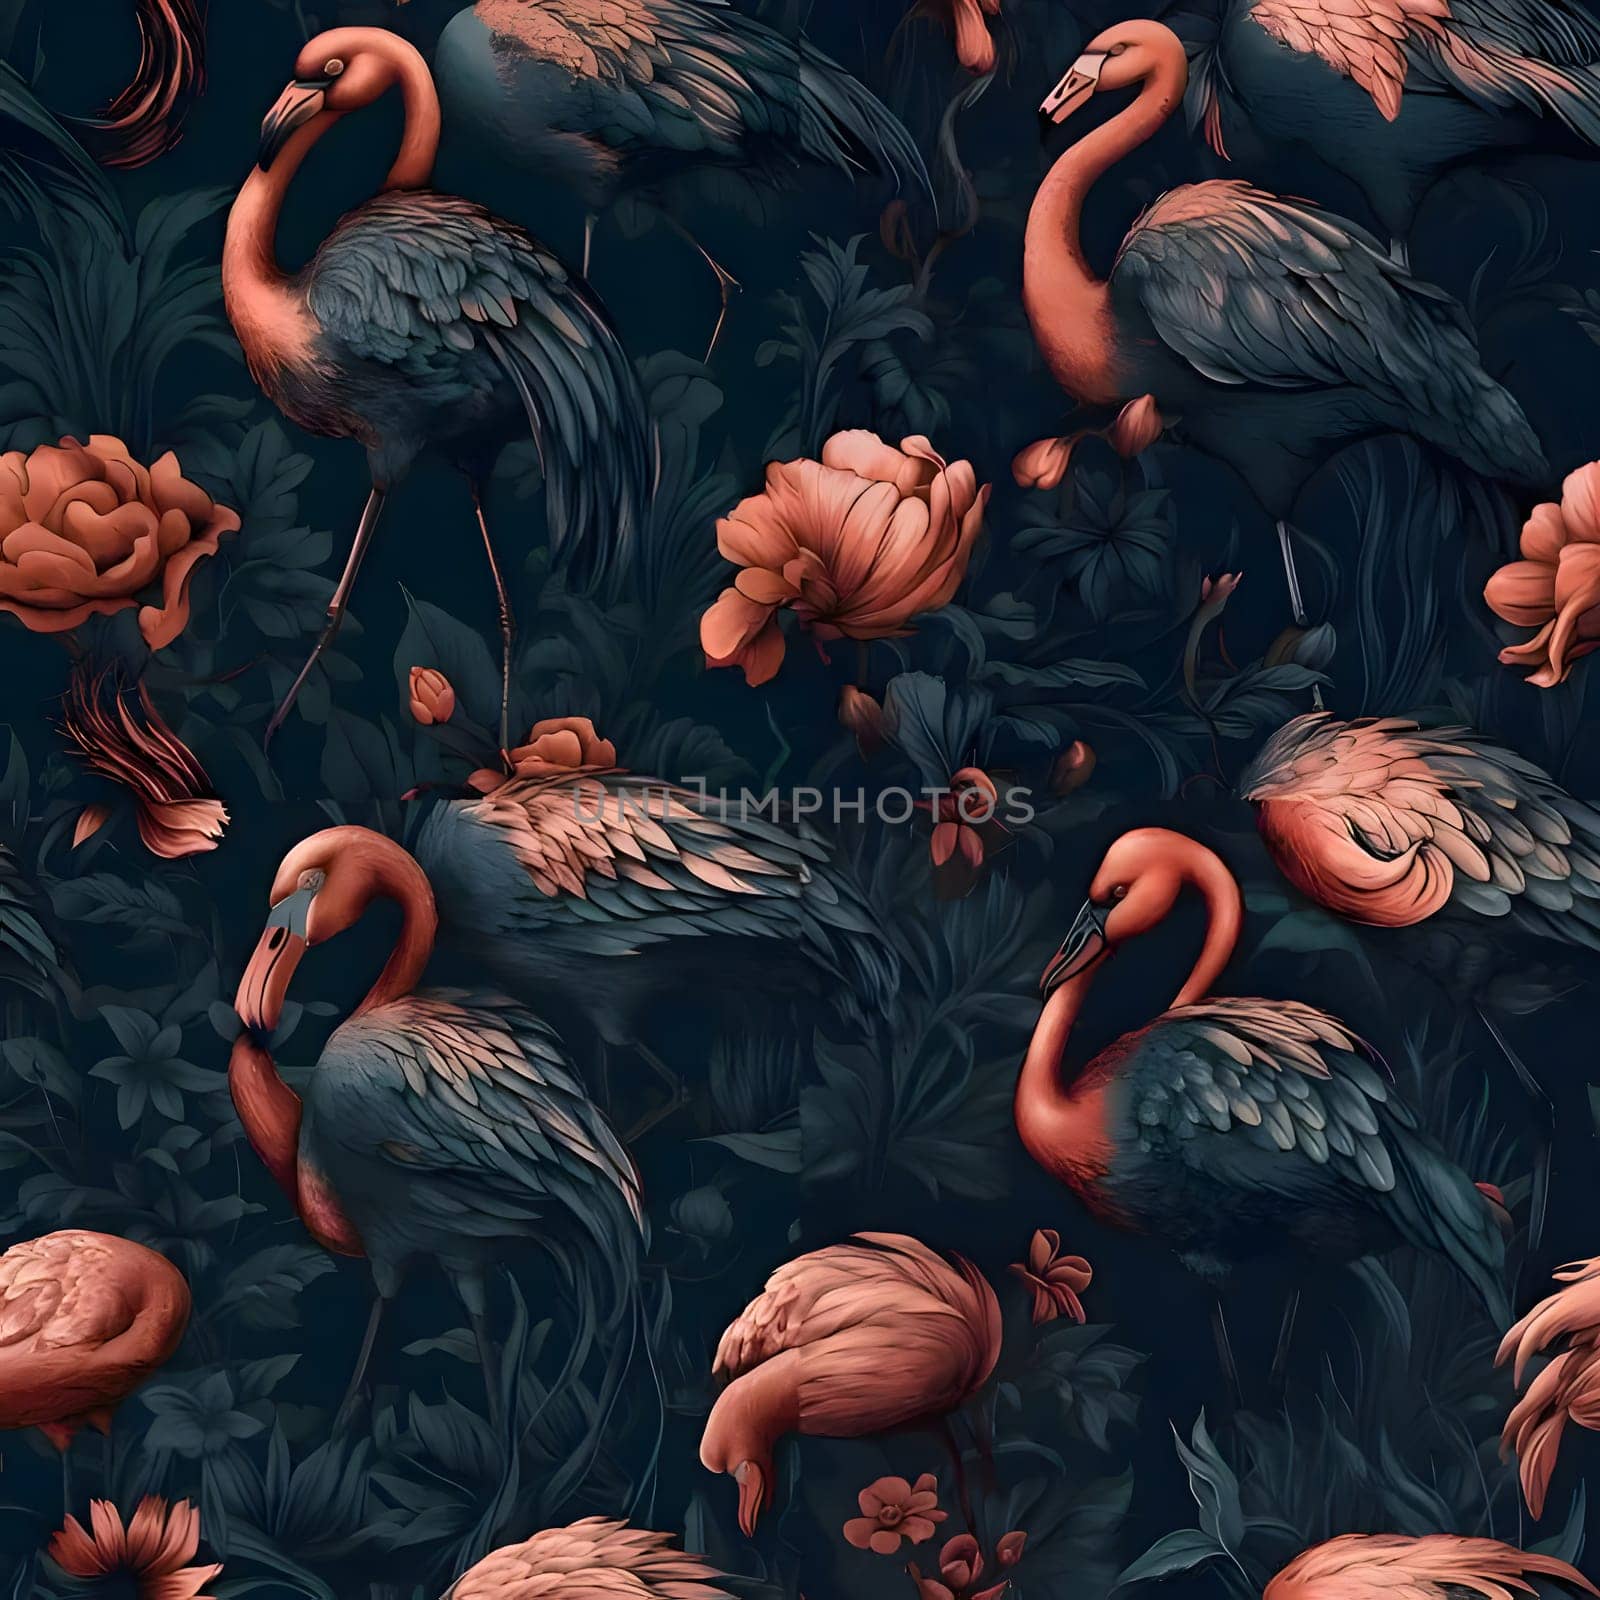 Patterns and banners backgrounds: Seamless pattern with flamingos and flowers. Vector illustration.